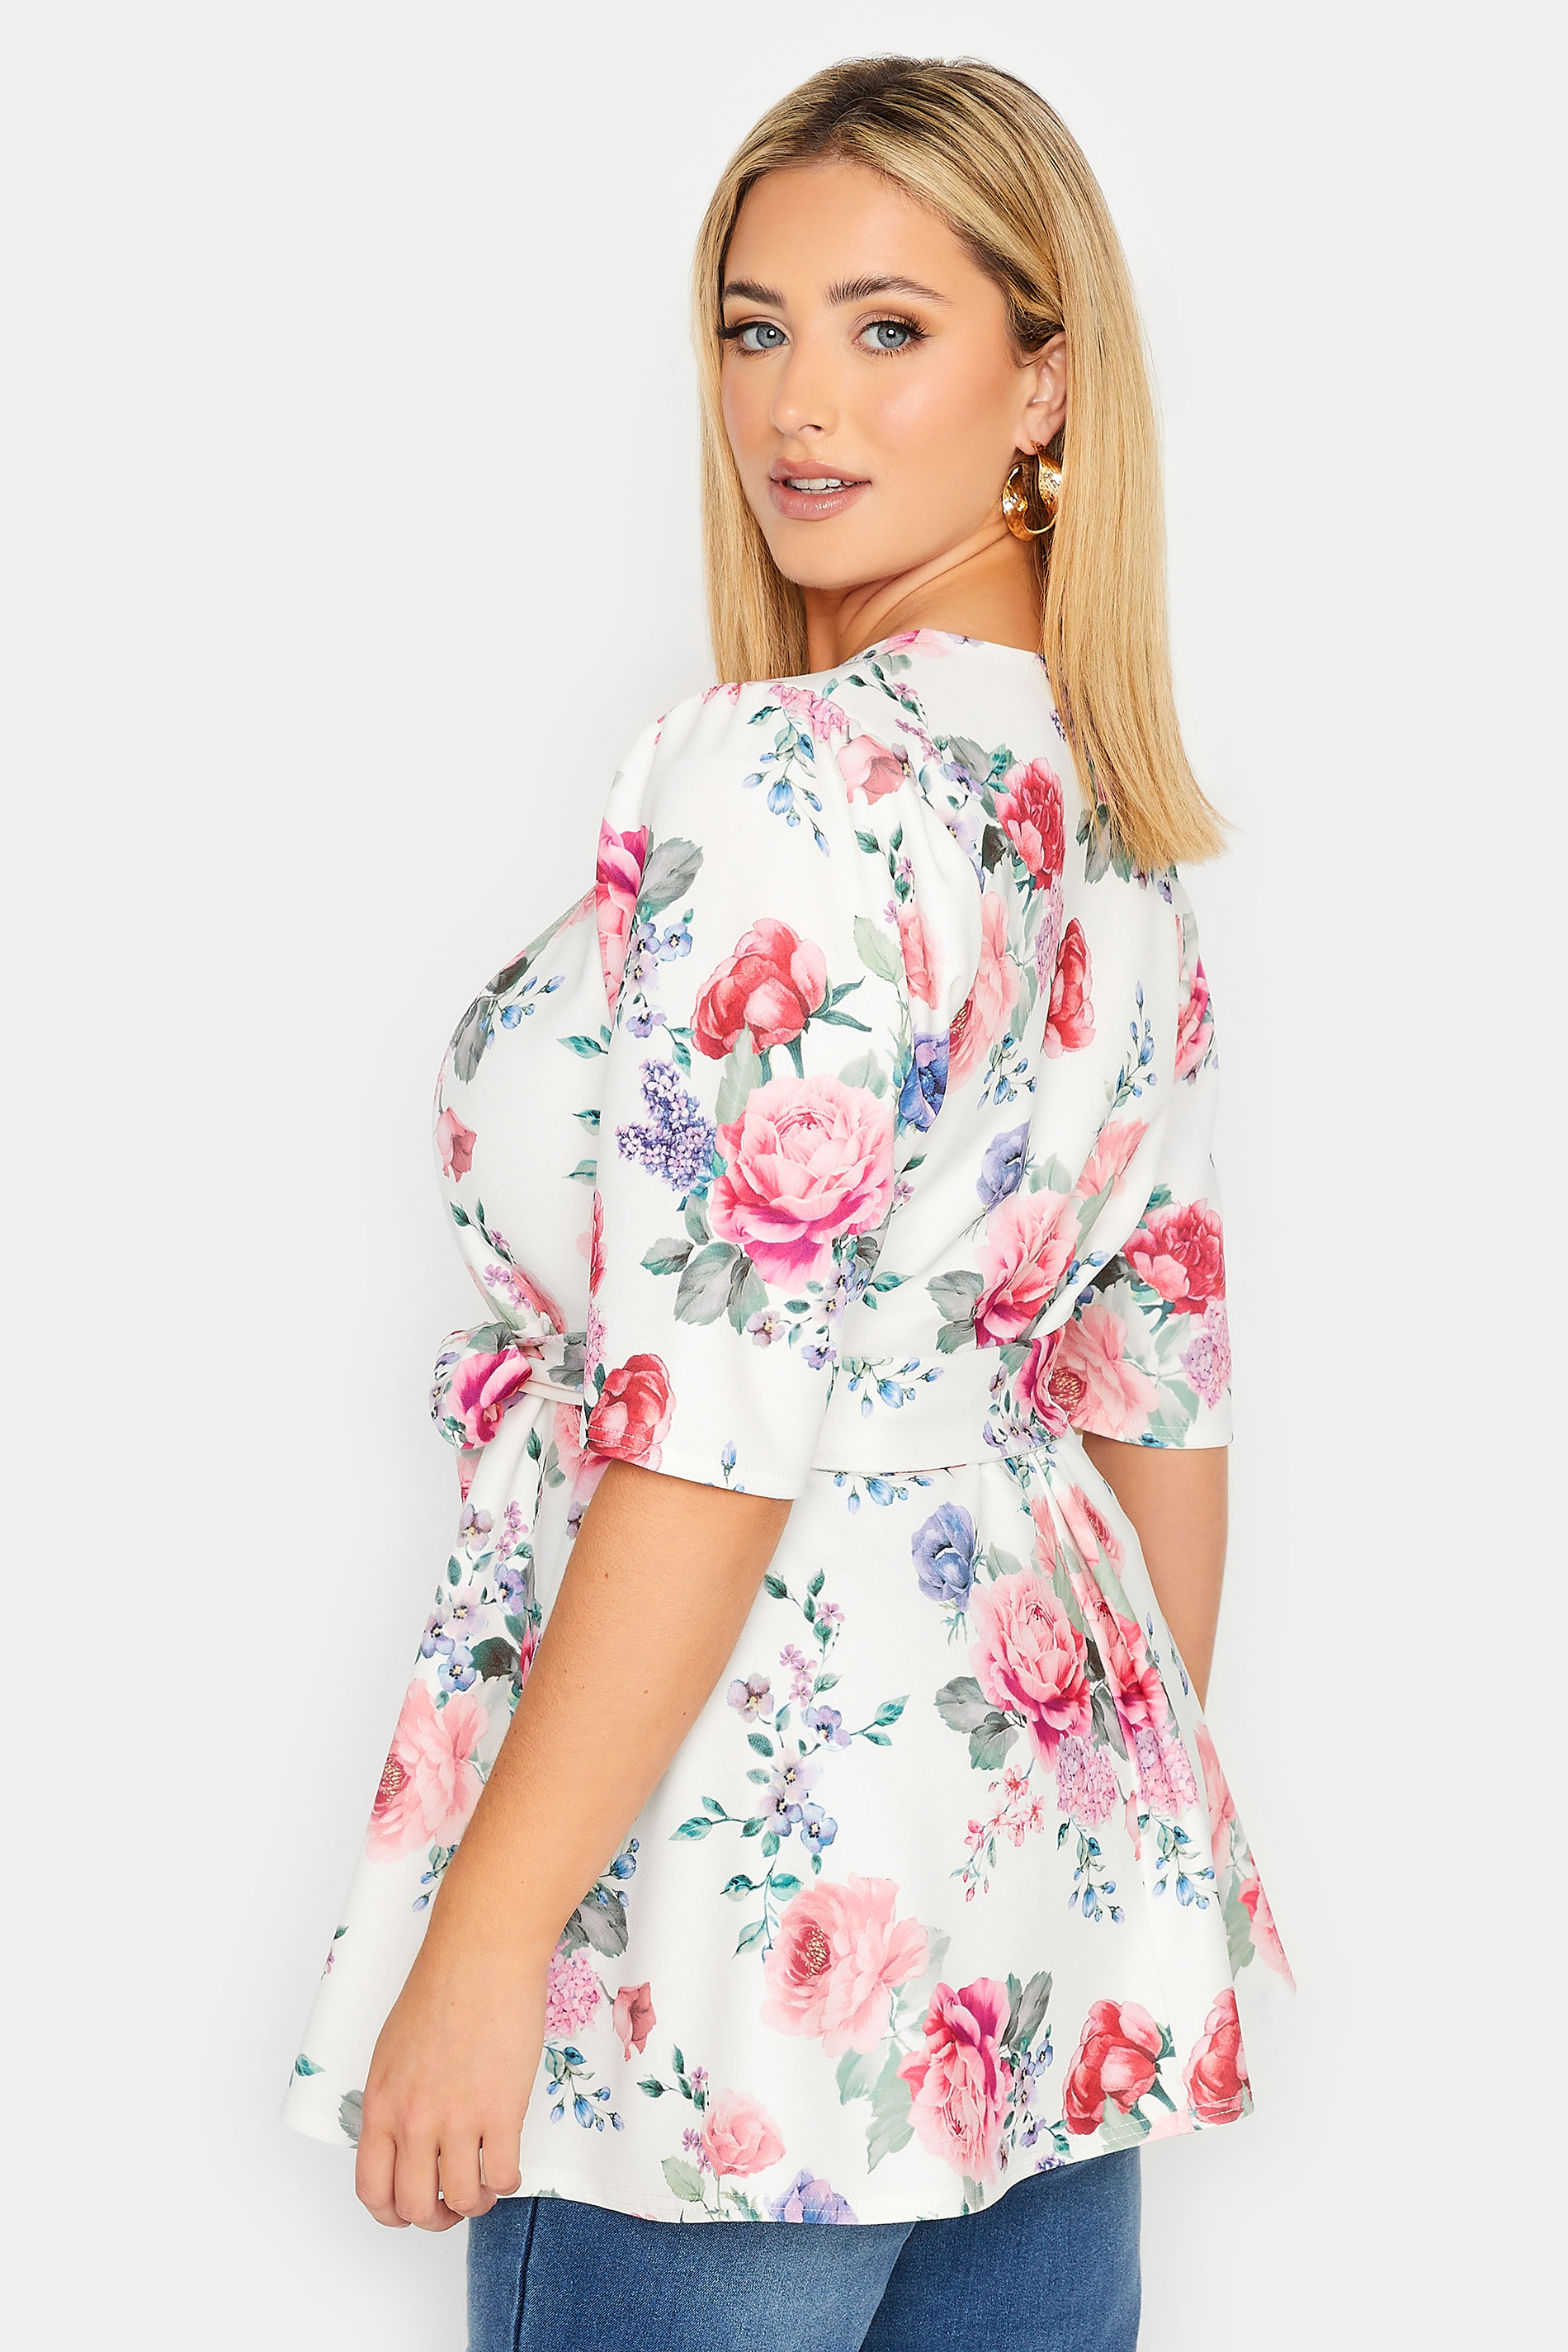 YOURS LONDON Plus Size White & Pink Floral Print Peplum Top | Yours Clothing 3